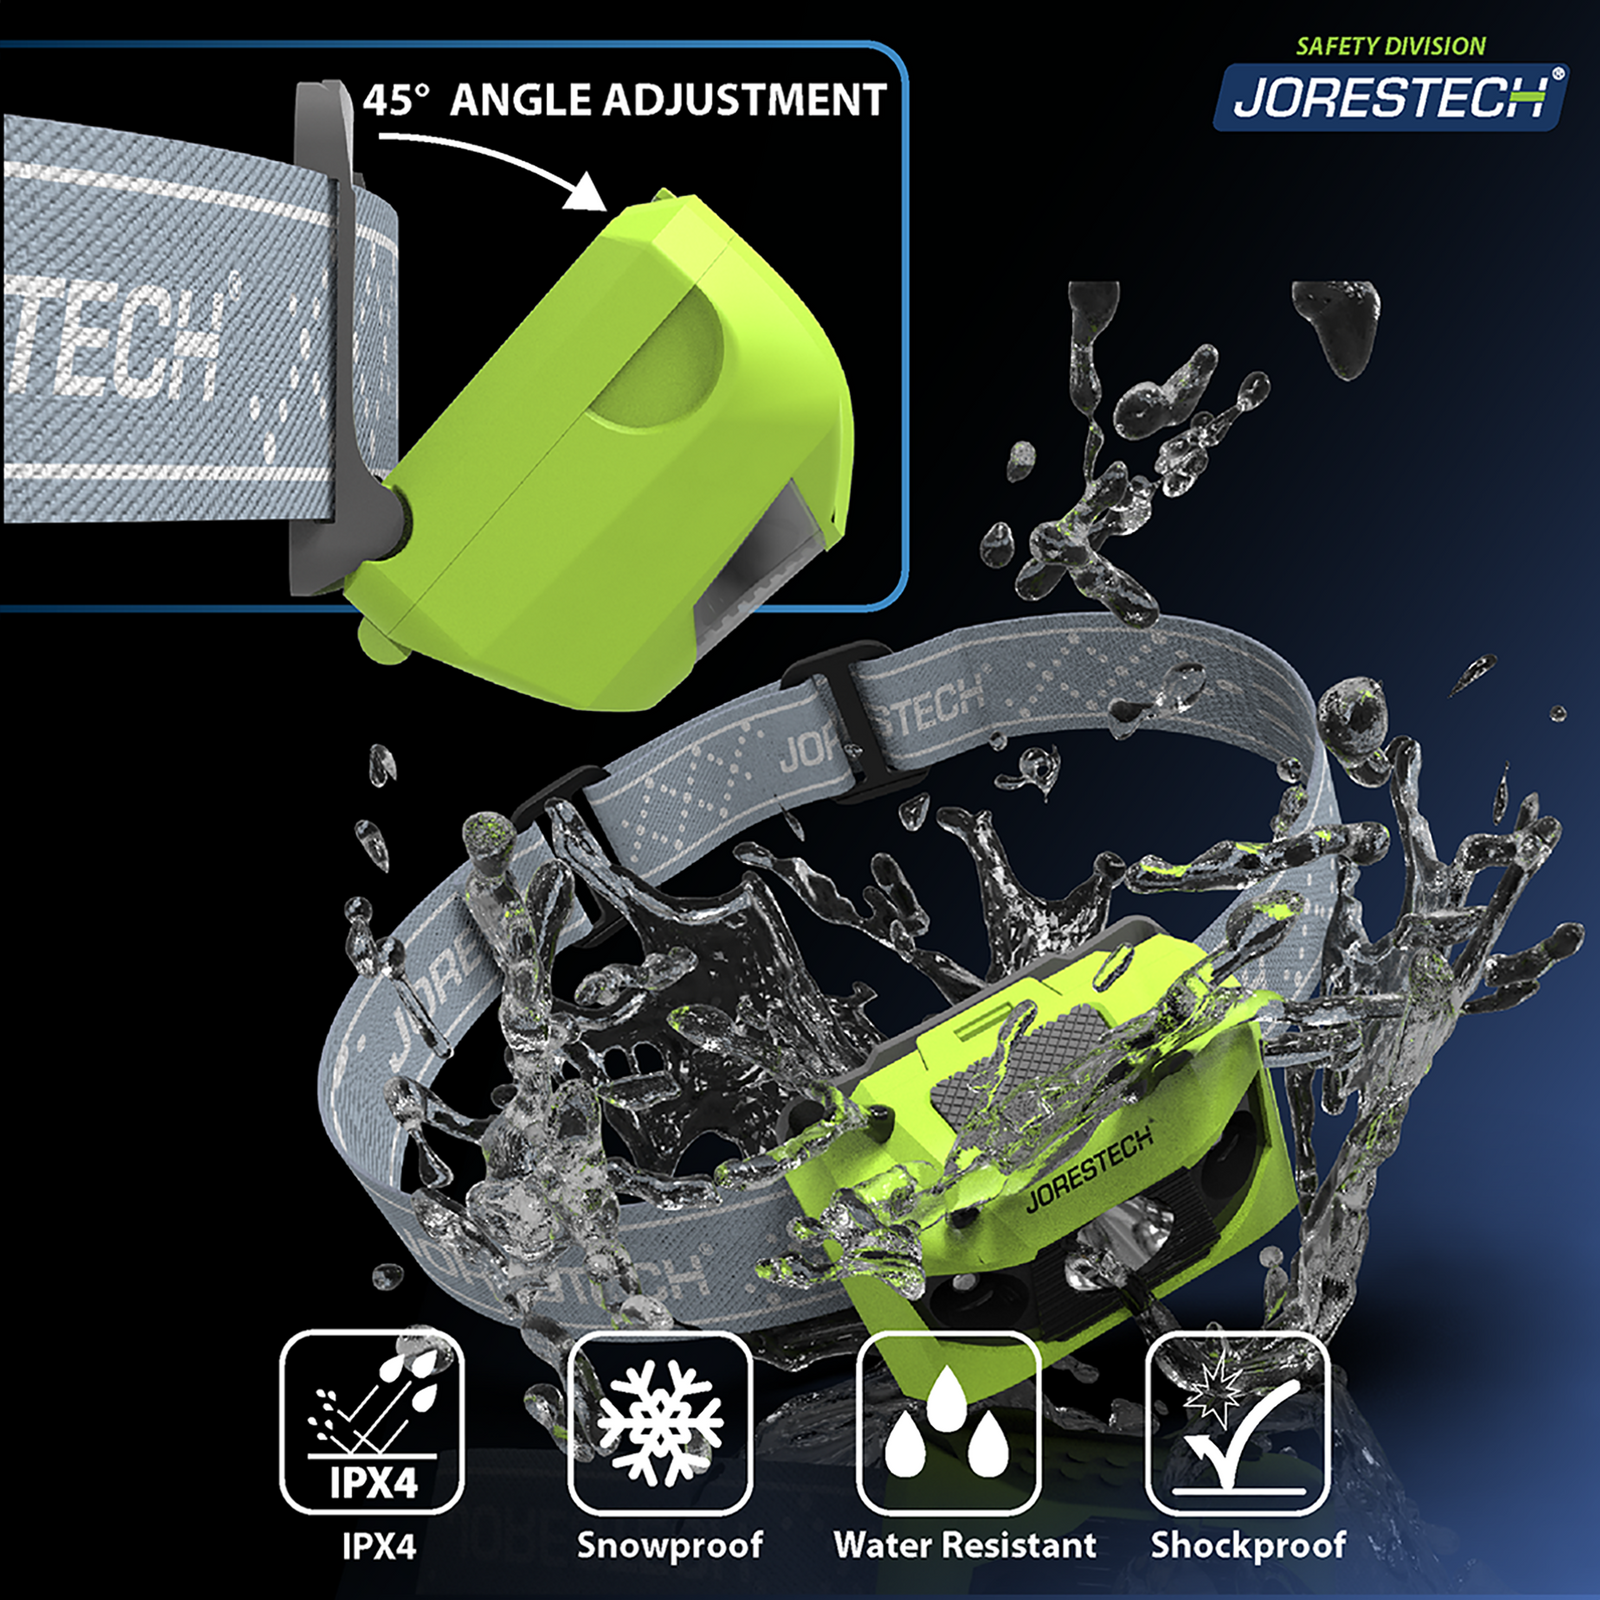 Features a lime JORESTECH head lamp with gray elastic size adjustable head band splashed with water. Also shows the side of the lime head lamp tilted 45 degrees forward with text that reads: 45 degrees adjustment. White icons on the bottom of the banner read: IPX4, snow-proof, water resistant. shockproof . The hole banner has a back and blue background